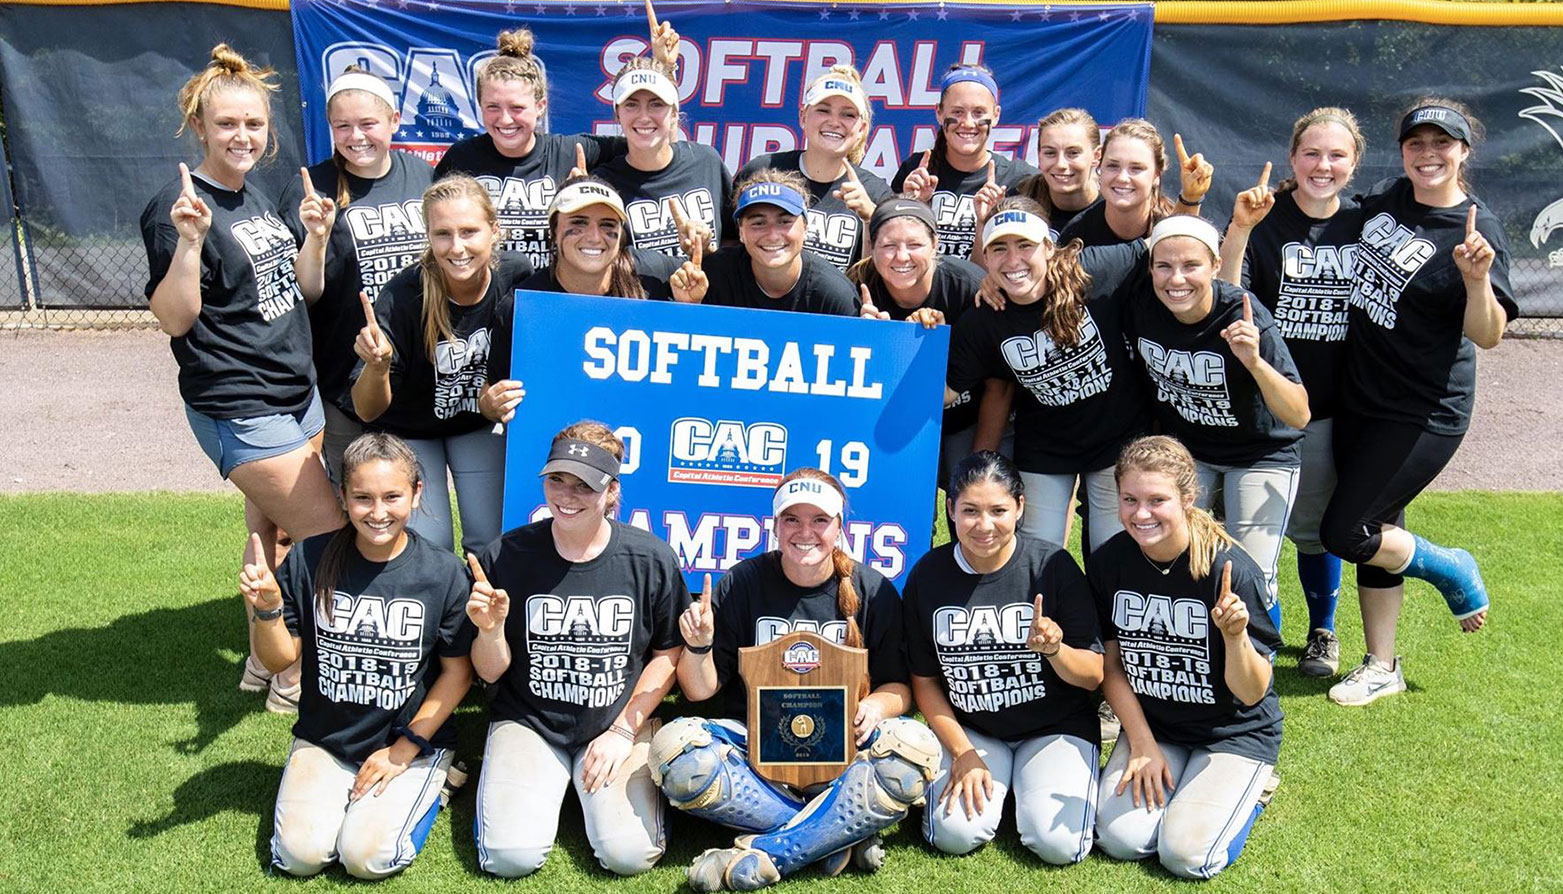 Christopher Newport Takes Two at Mary Washington to Capture Capital Athletic Conference Softball Crown